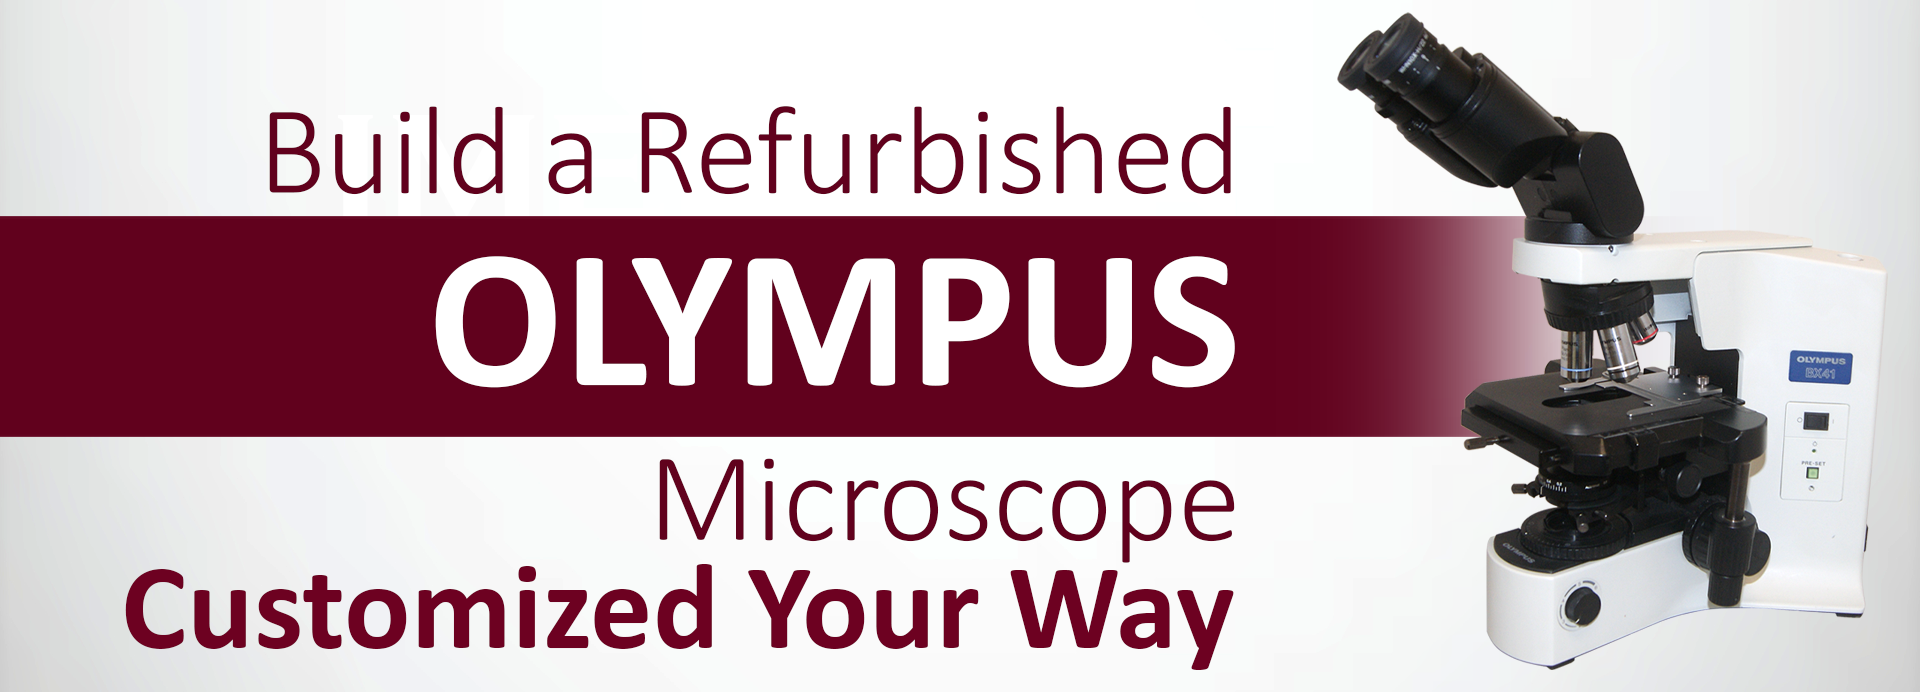 Build an Olympus microscope order form banner